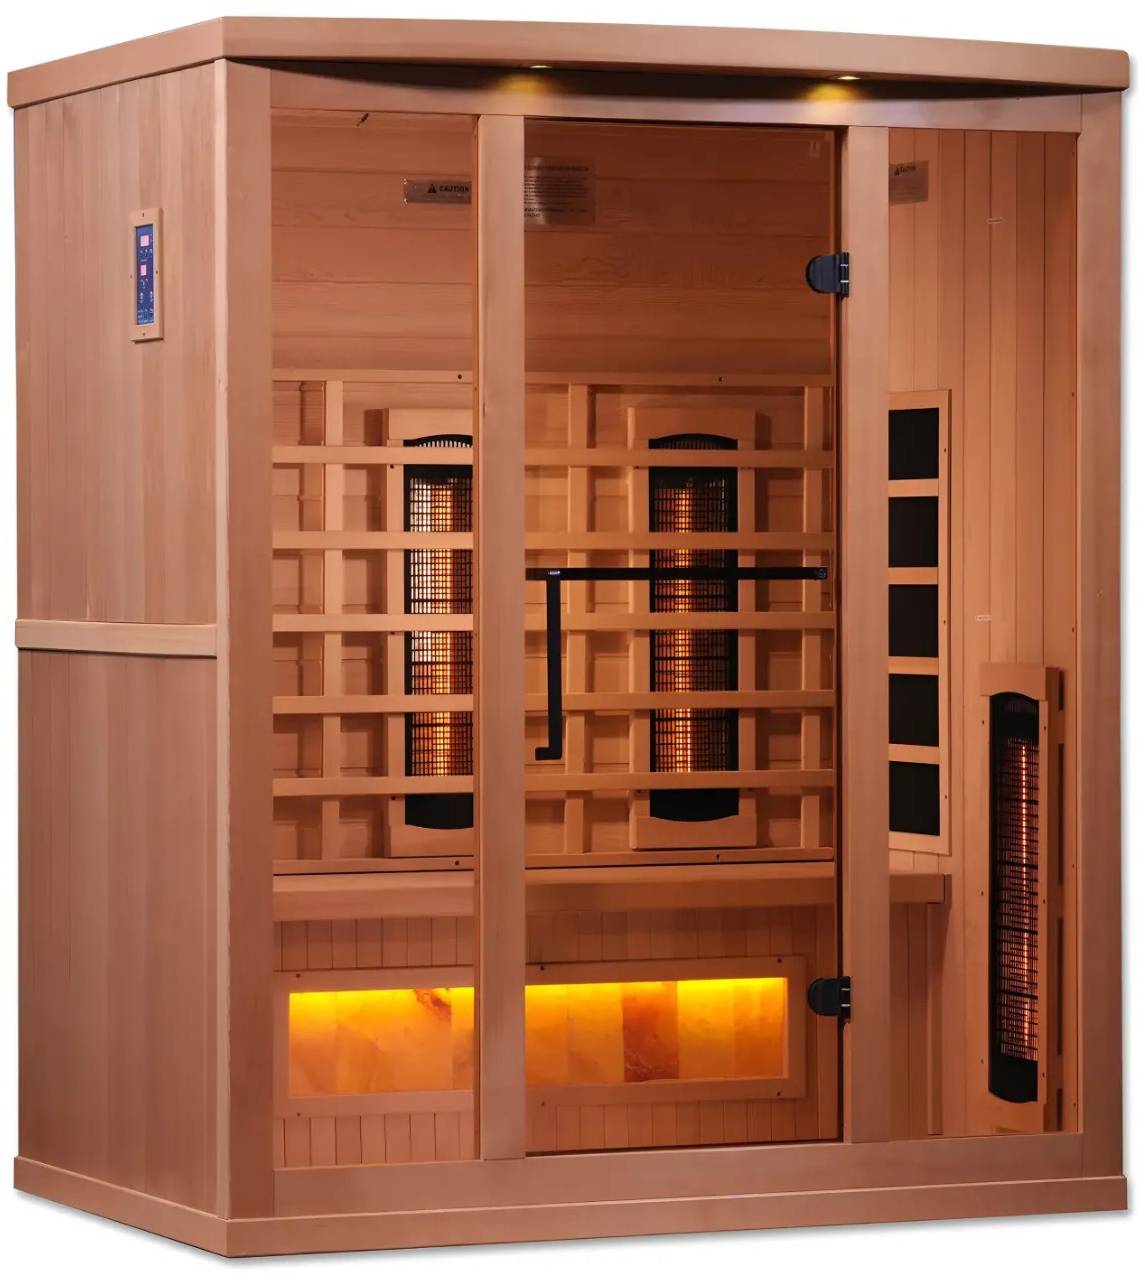 ZiahCare's Golden Designs 3 Person Full Spectrum Infrared Sauna Reserve Edition Mockup Image 3